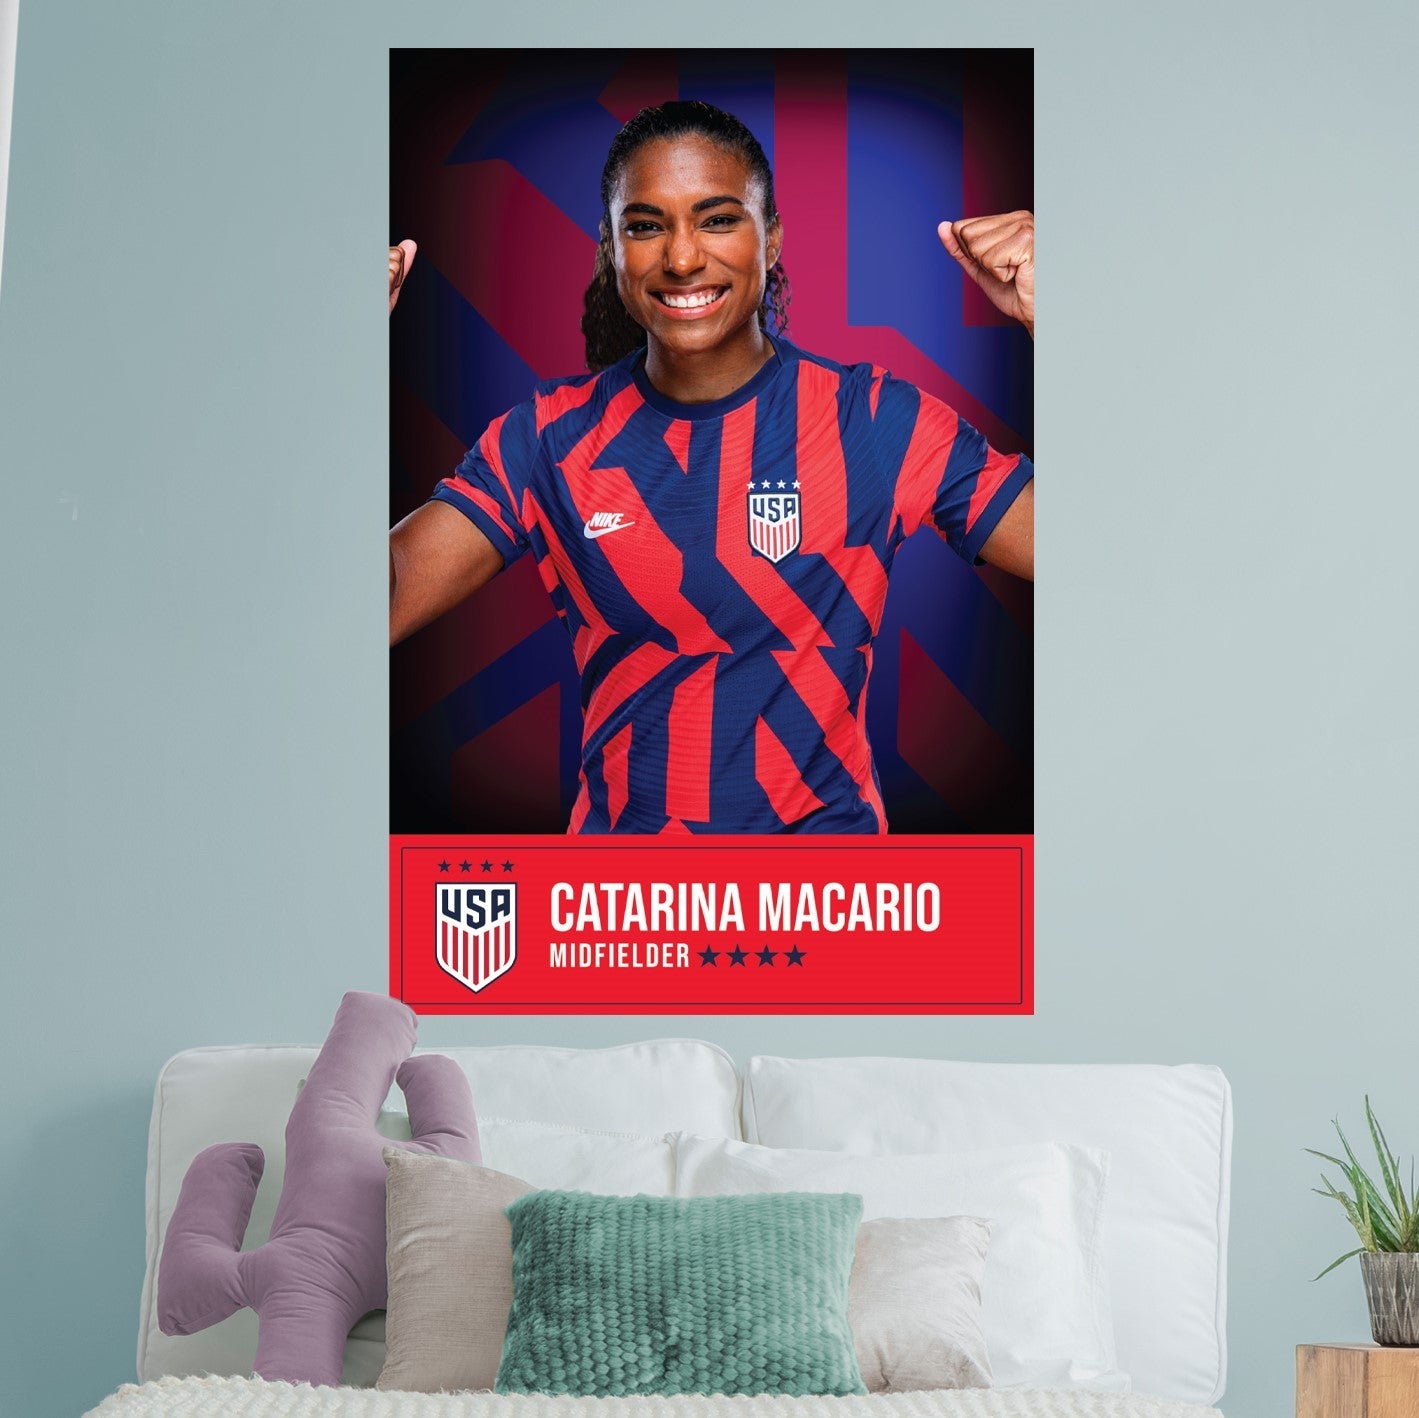 Catarina Macario Nameplate Poster - Officially Licensed USWNT Removable Adhesive Decal